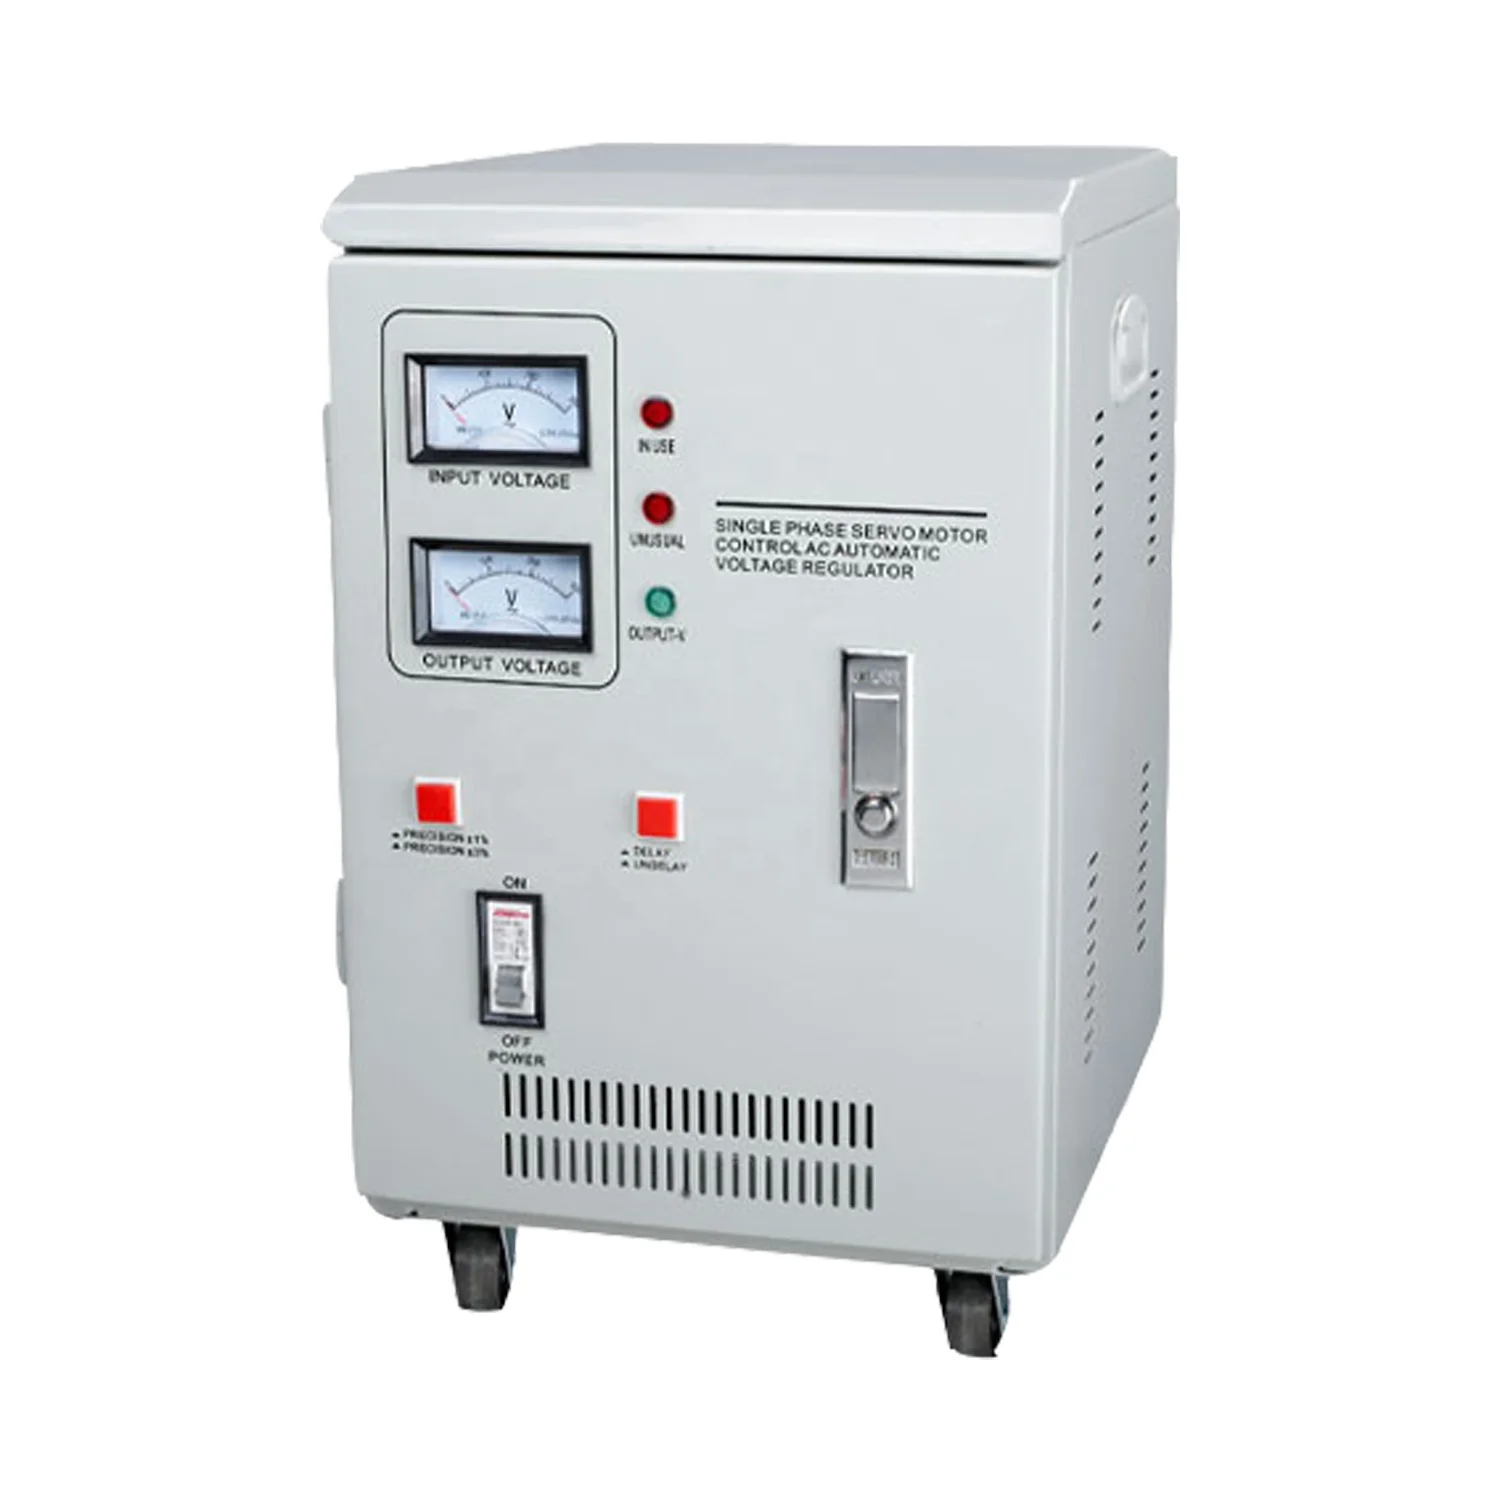 Habubu accumulate Psychological 10000w Acsessories 220v Ac Rectifier Guilera Manual Rectifier Alternator Voltage  Regulator - Buy Voltage Regulator 3 Phase 45 Kva,Scr Voltage Regulator Ac  220v 6000w,Automatic Voltage Regulator Jacobs Wn-5000 Product on Alibaba.com